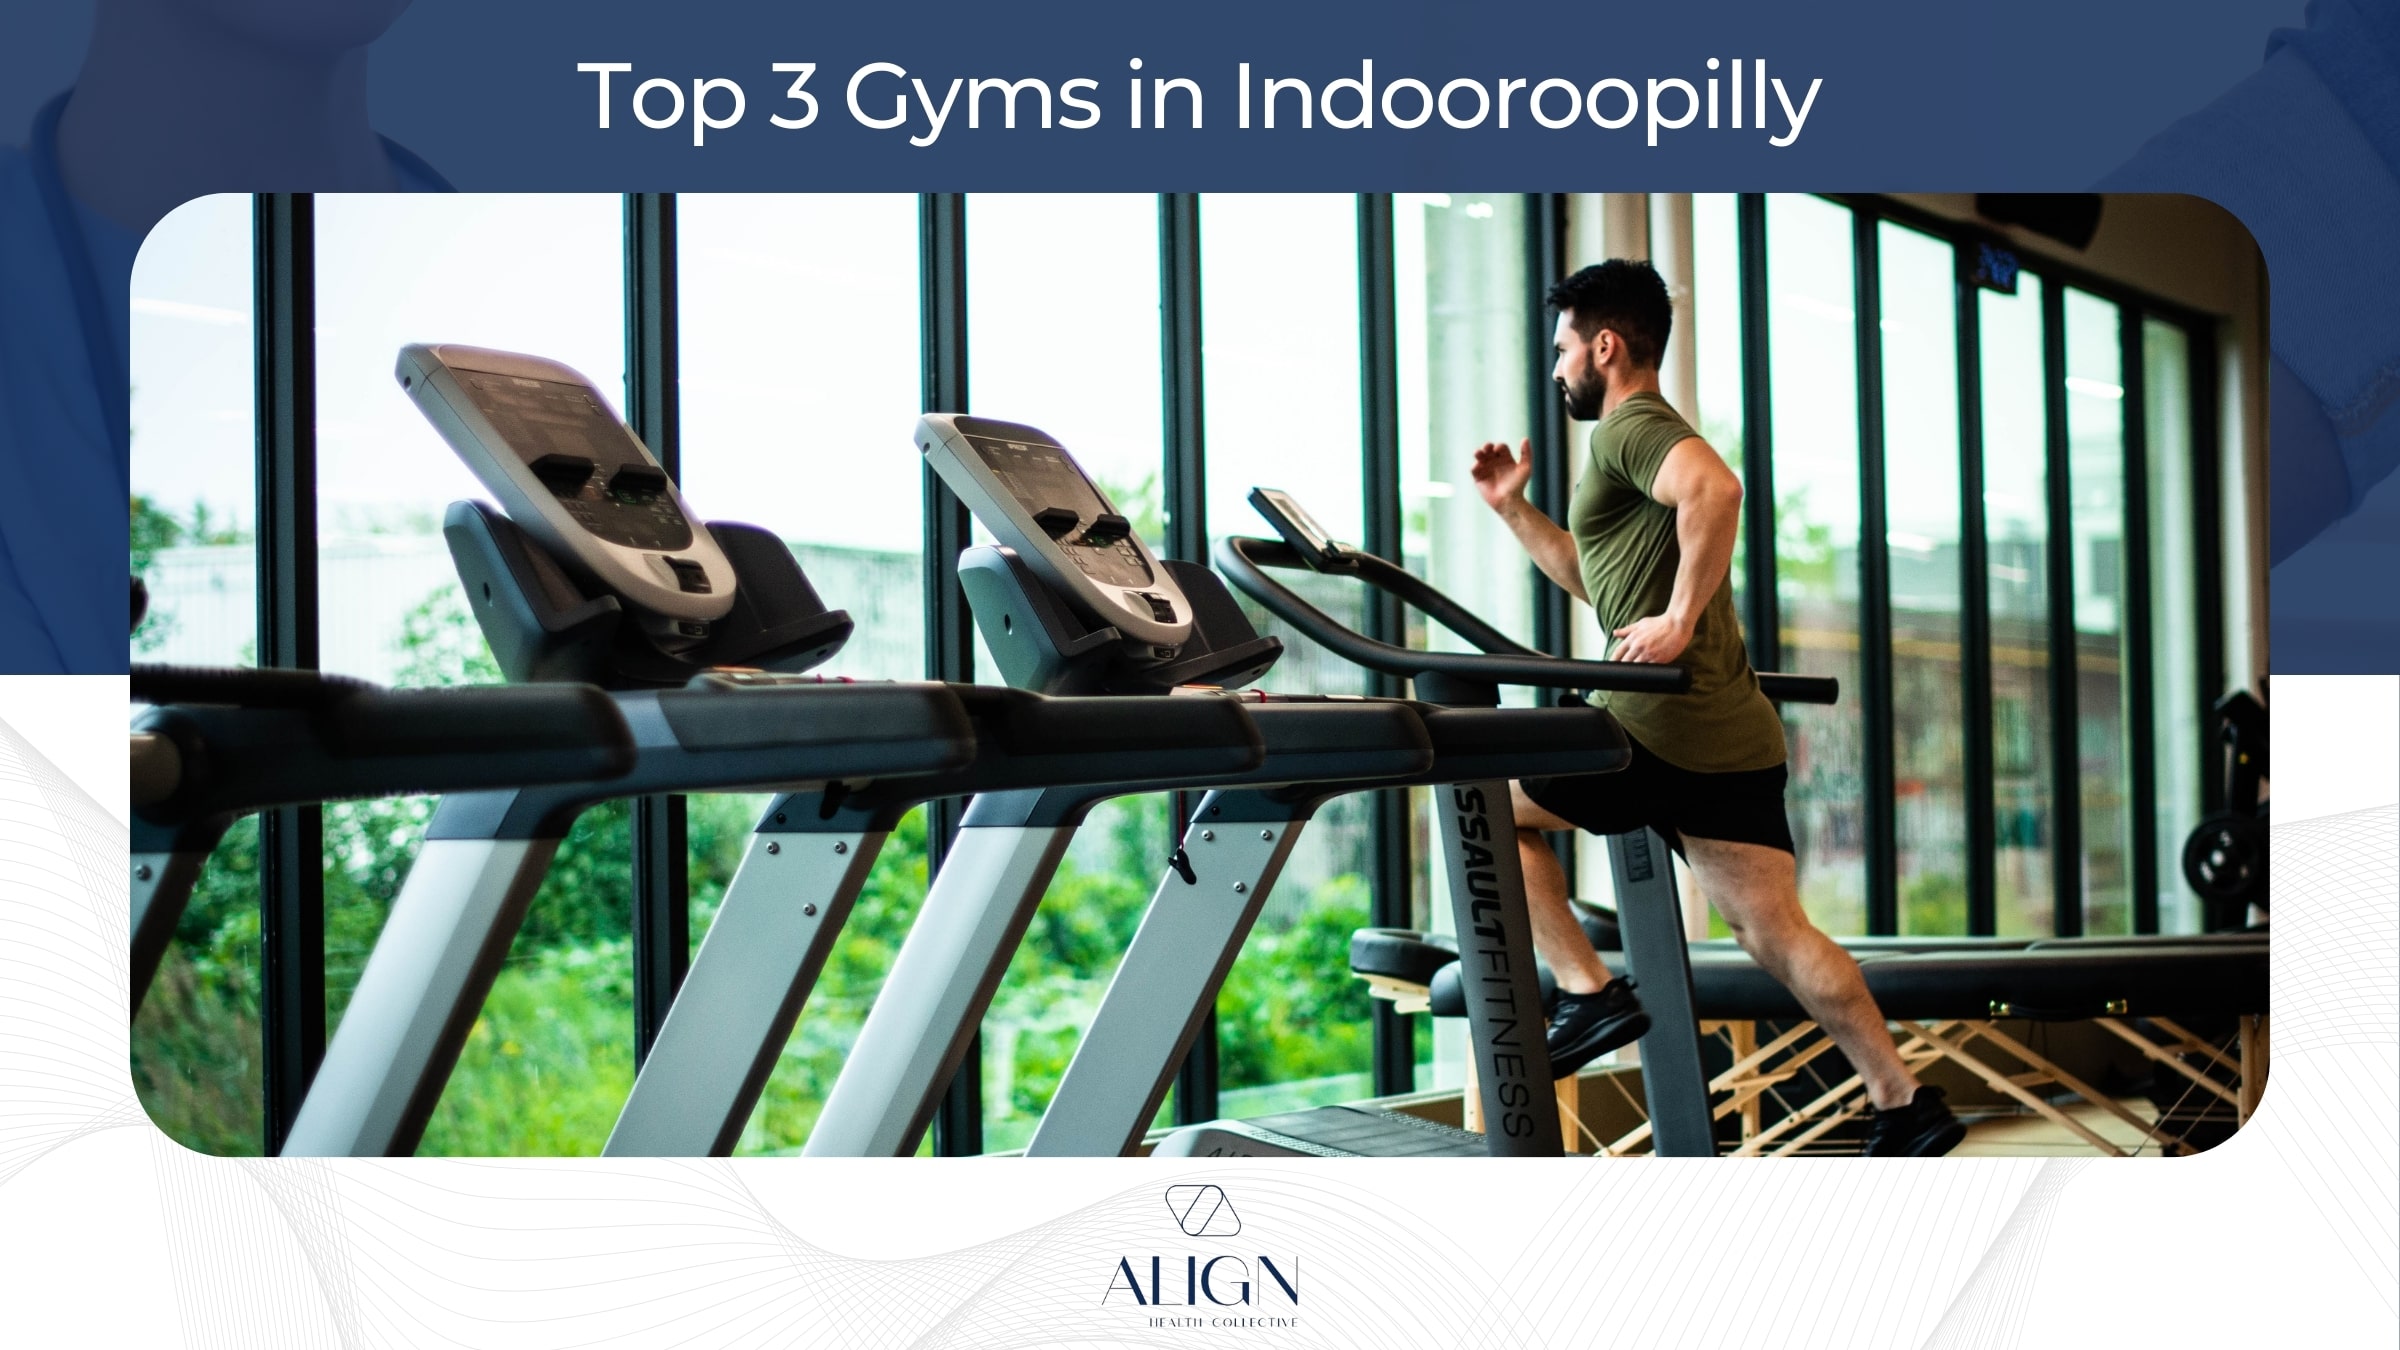 Top 3 Indooroopilly Gyms